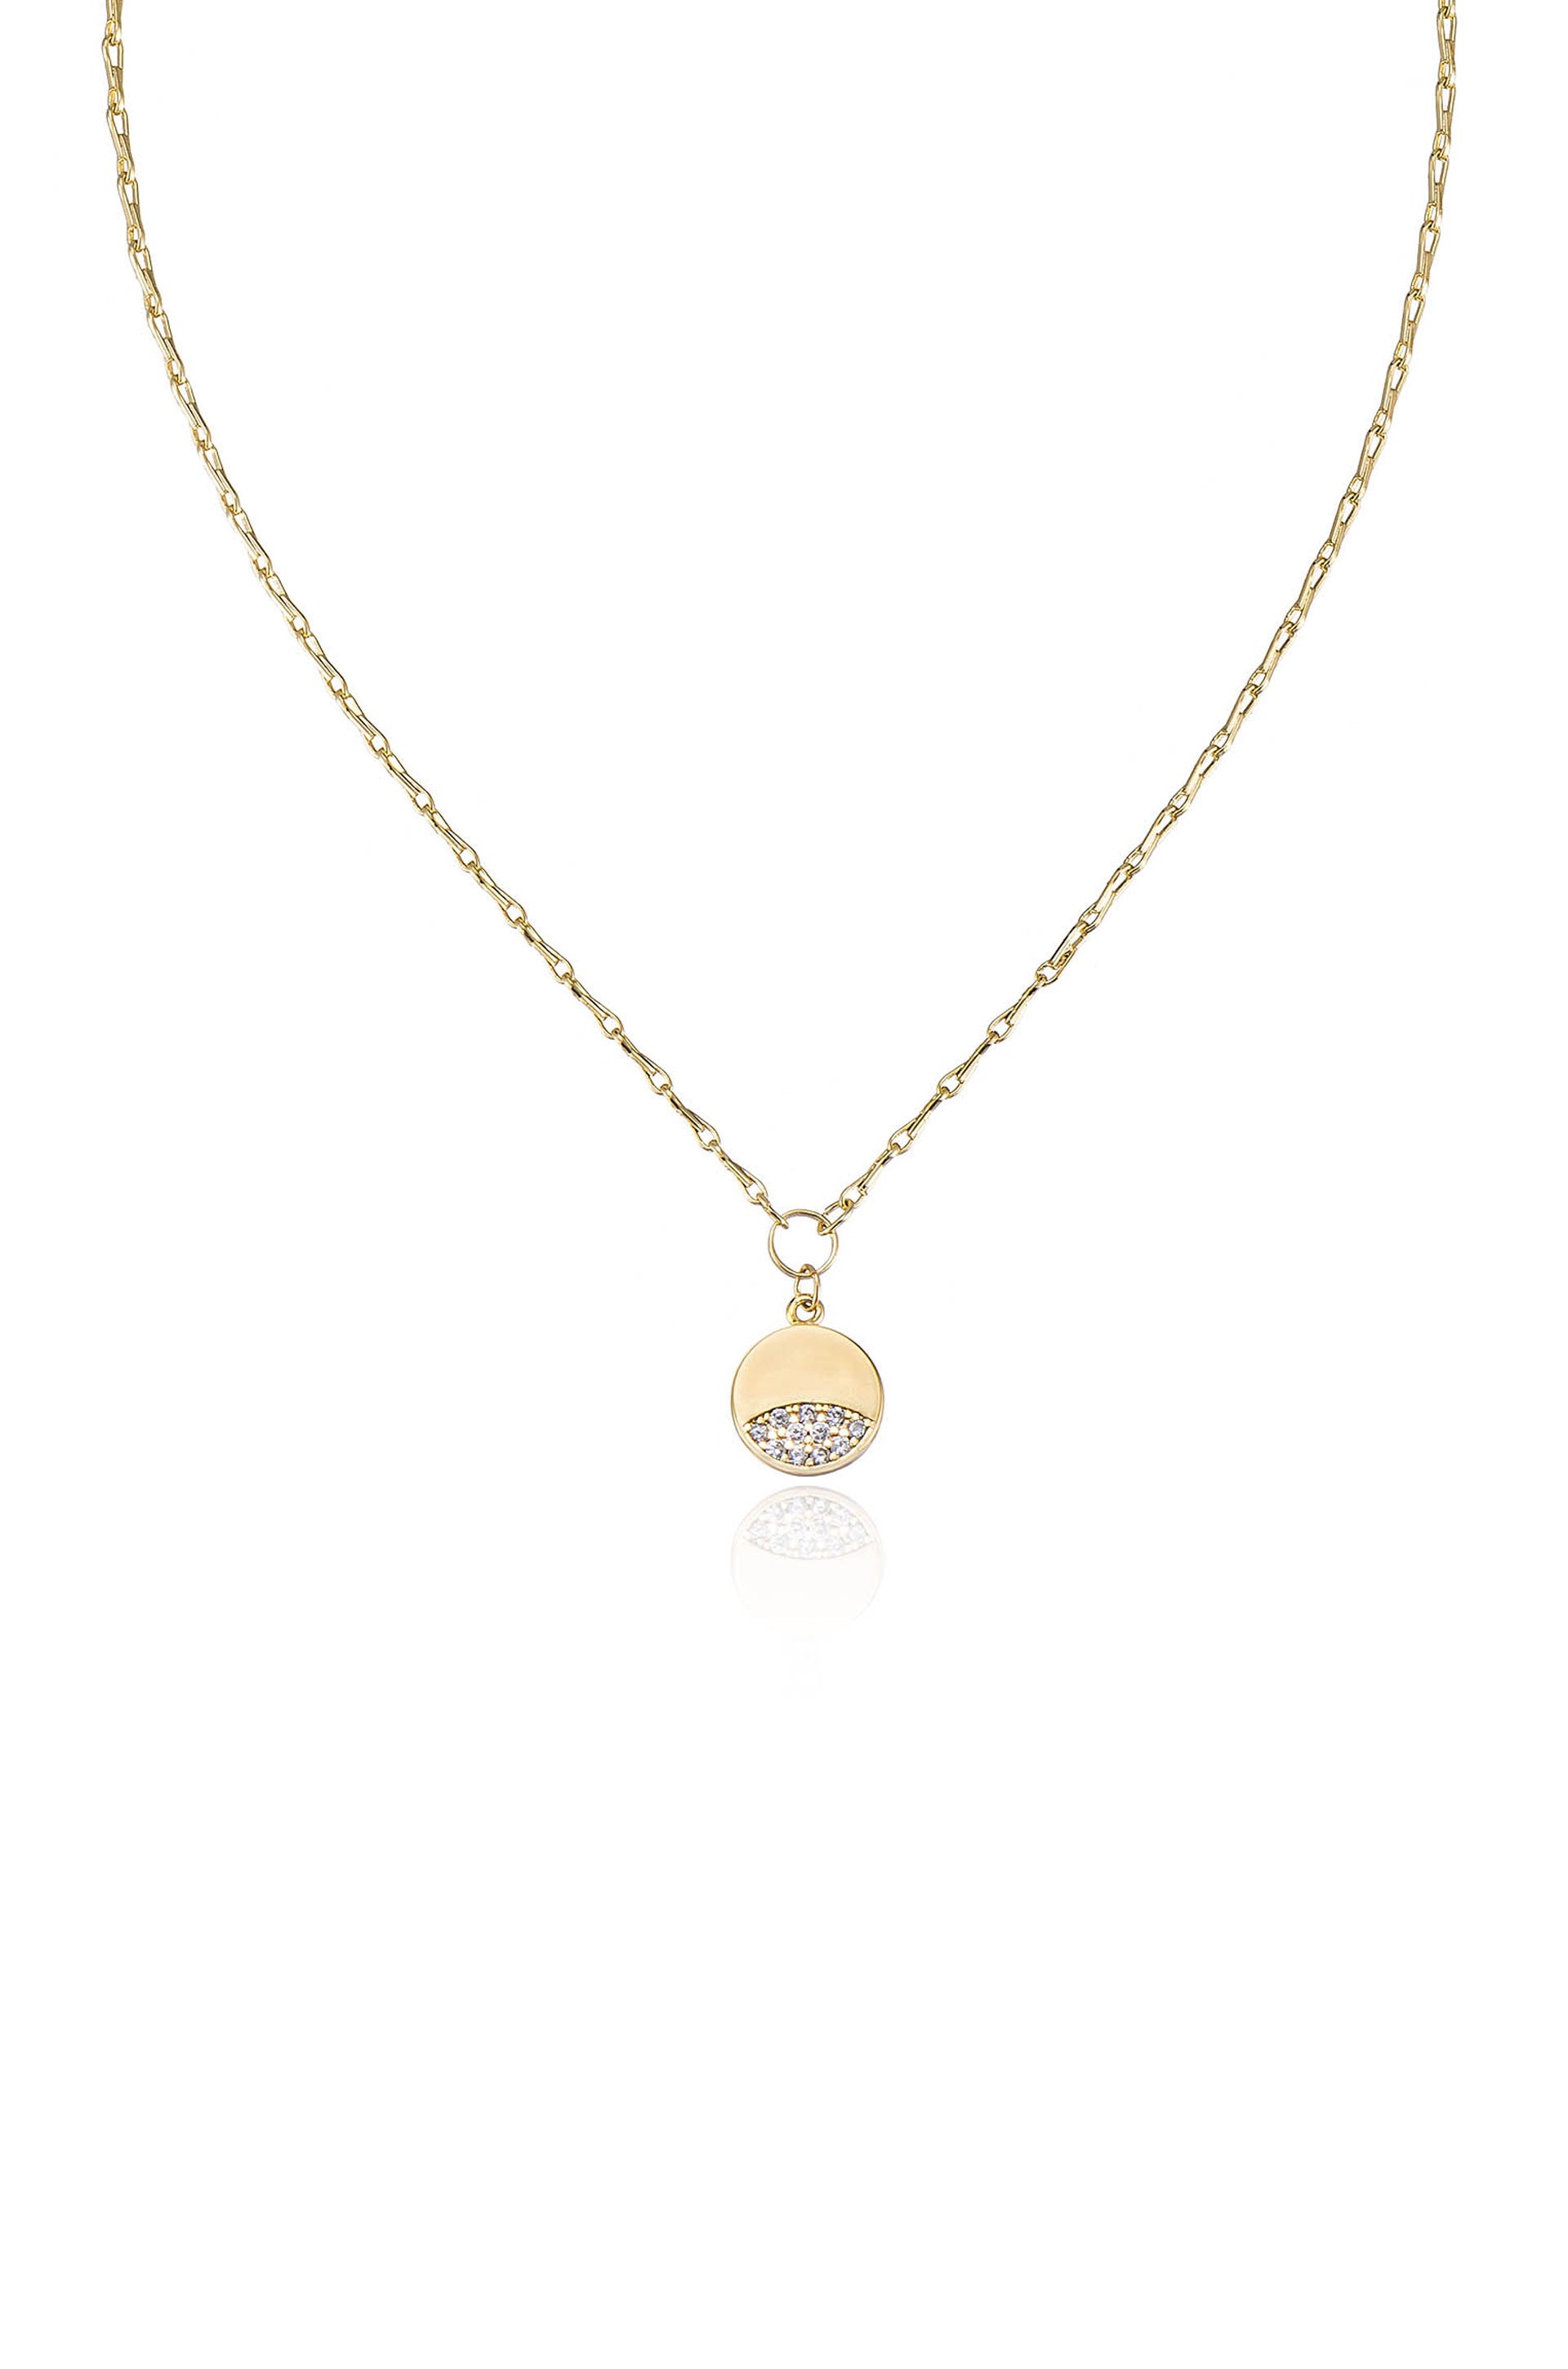 Crystal Dipped 18k Gold Plated Pendant Necklace